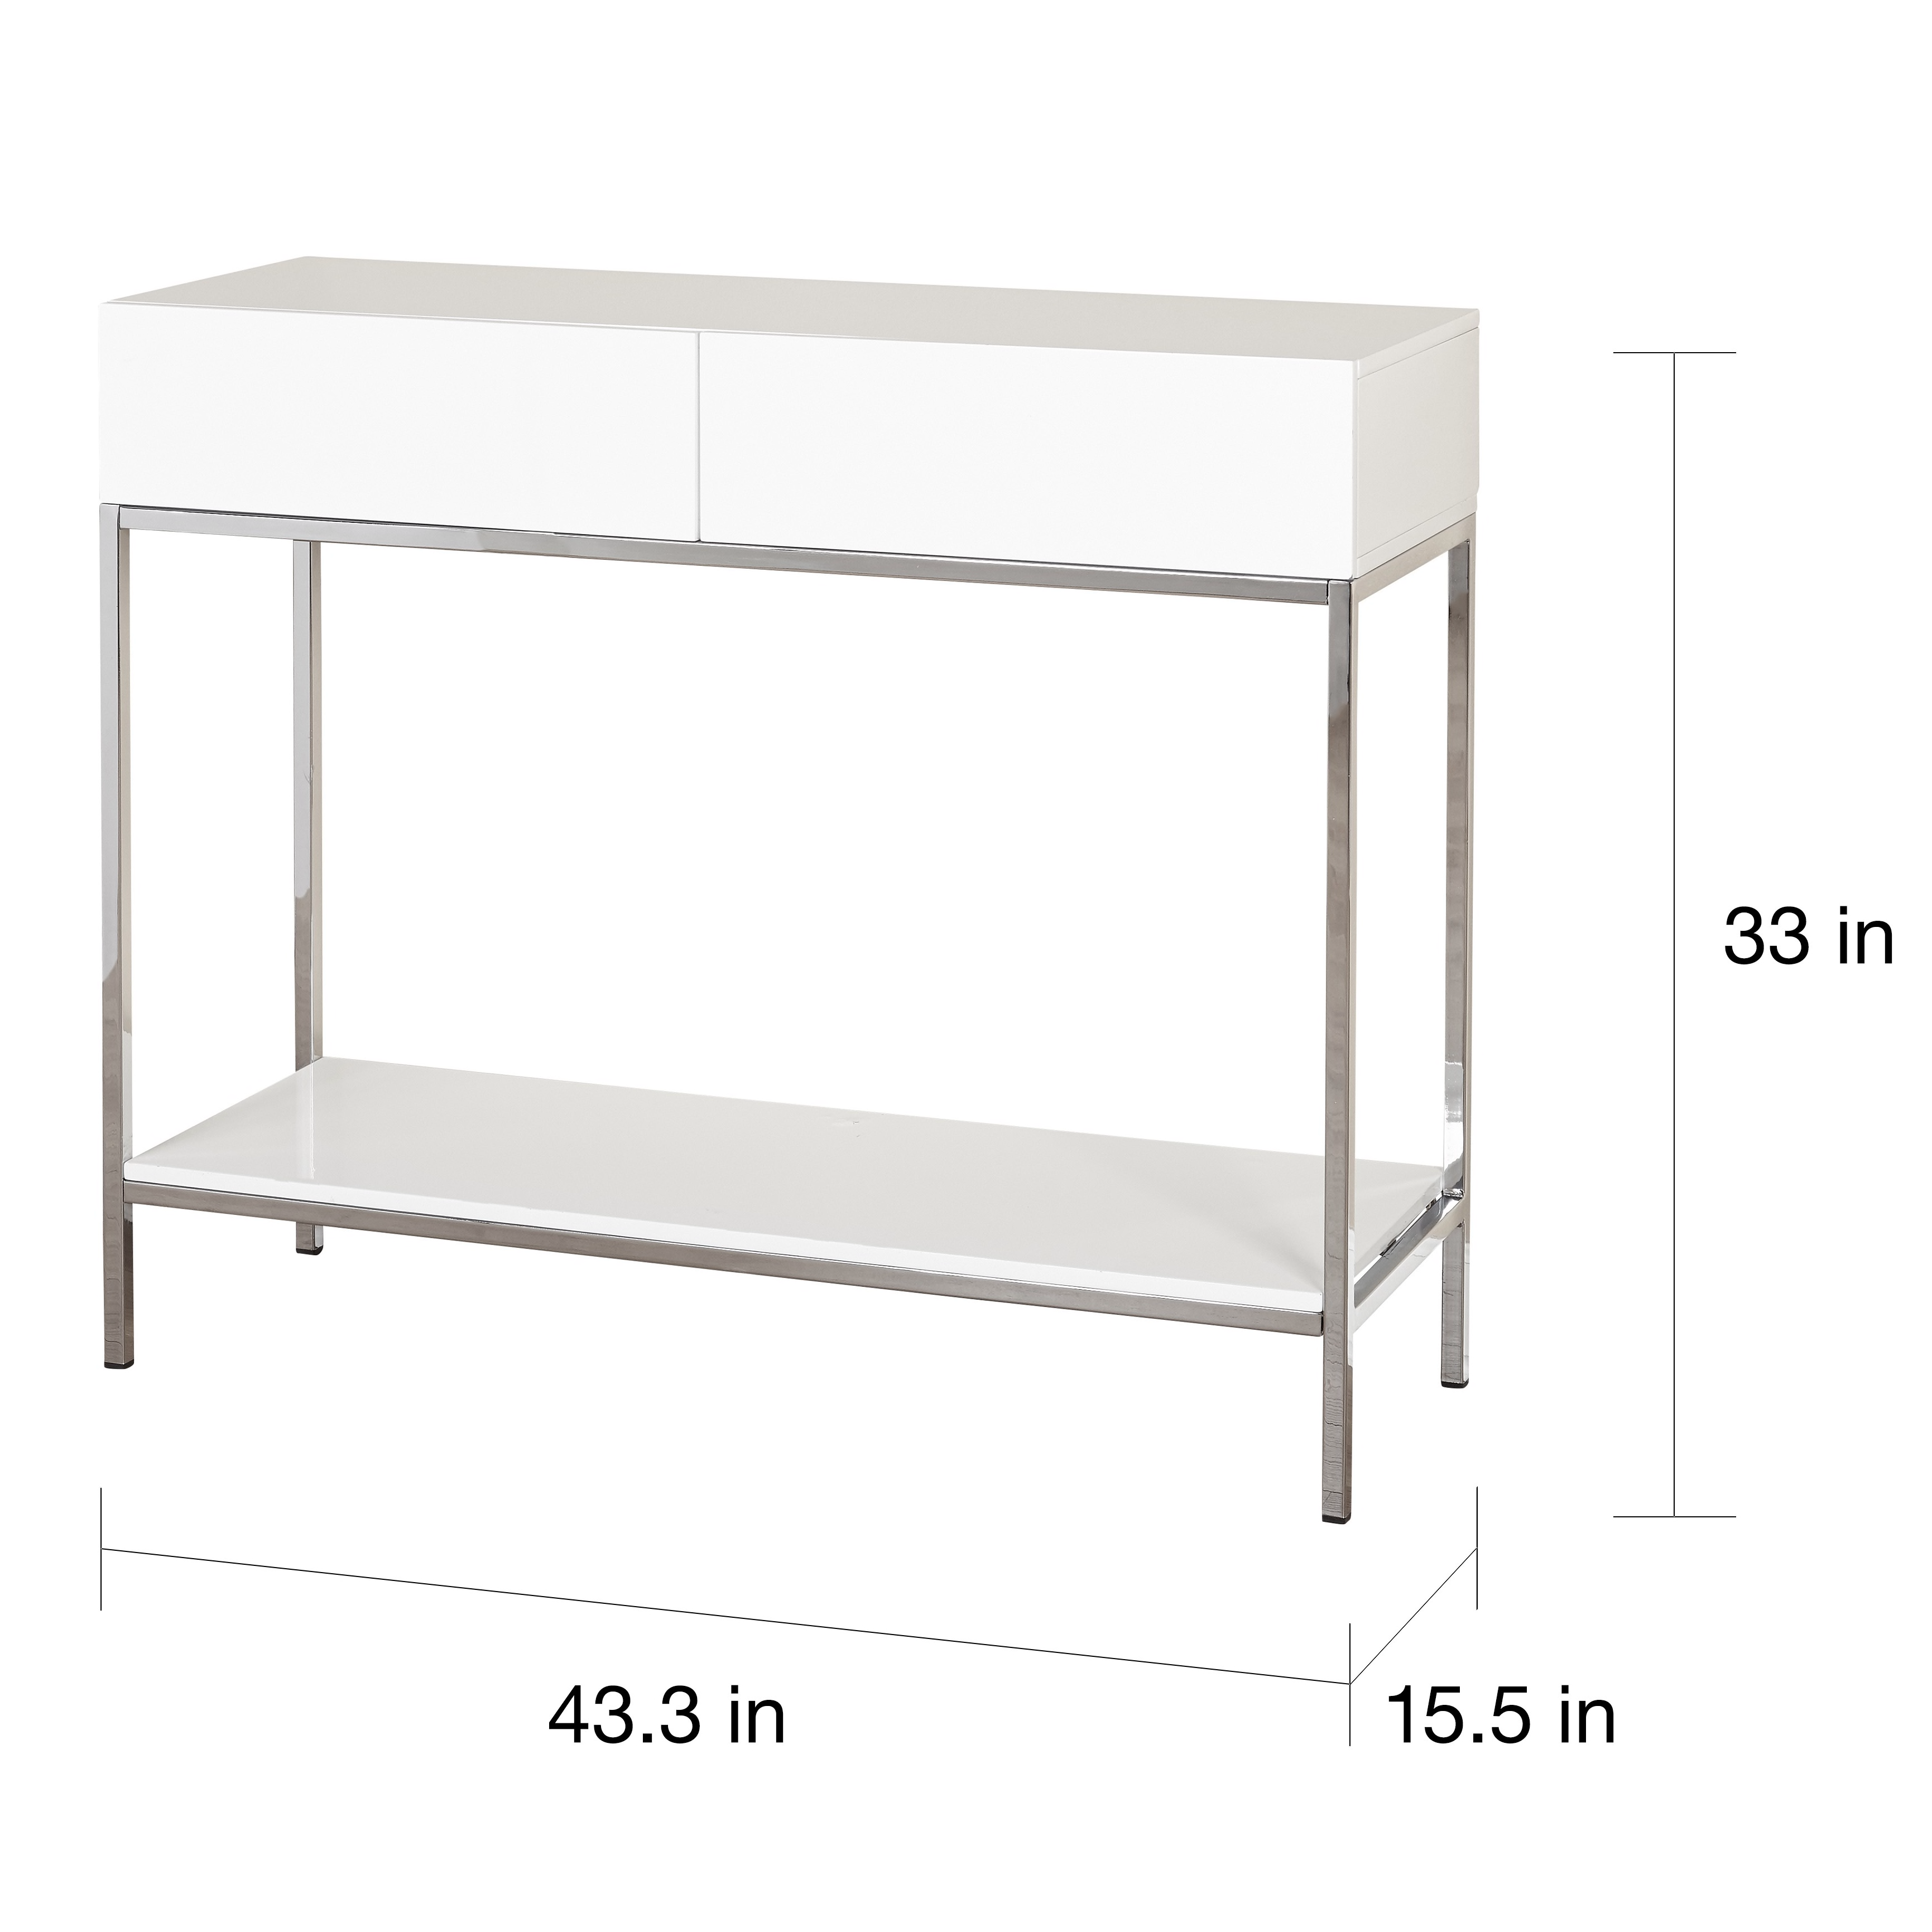 simple living white wood and chrome metal high gloss console table glass accent sofa with shelf free shipping today outdoor grey nest tables floral lamp shabby chic chest drawers